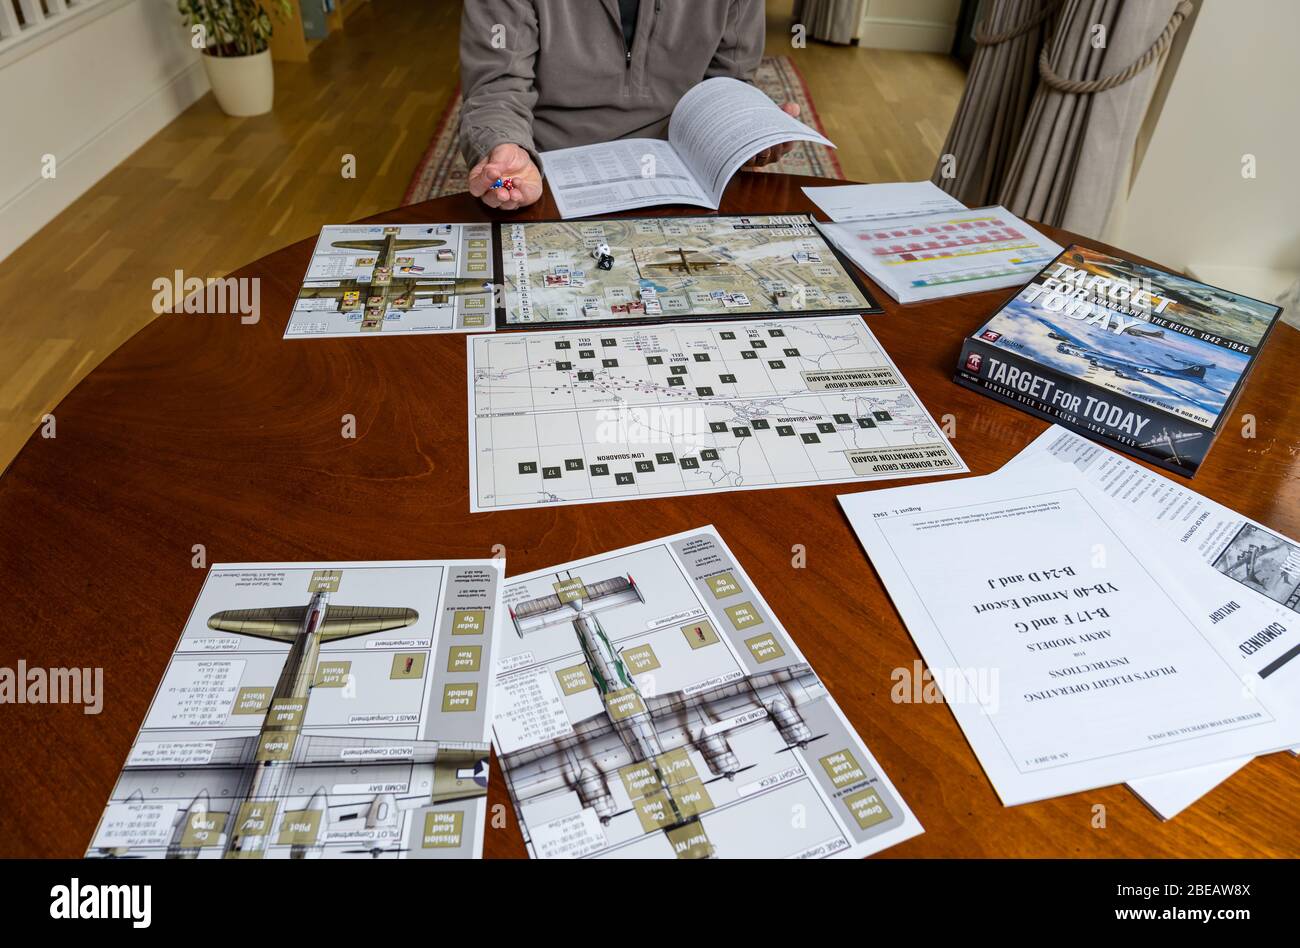 Senior man playing one player solitaire war board game called Target for Today set up on dining table in home, UK Stock Photo